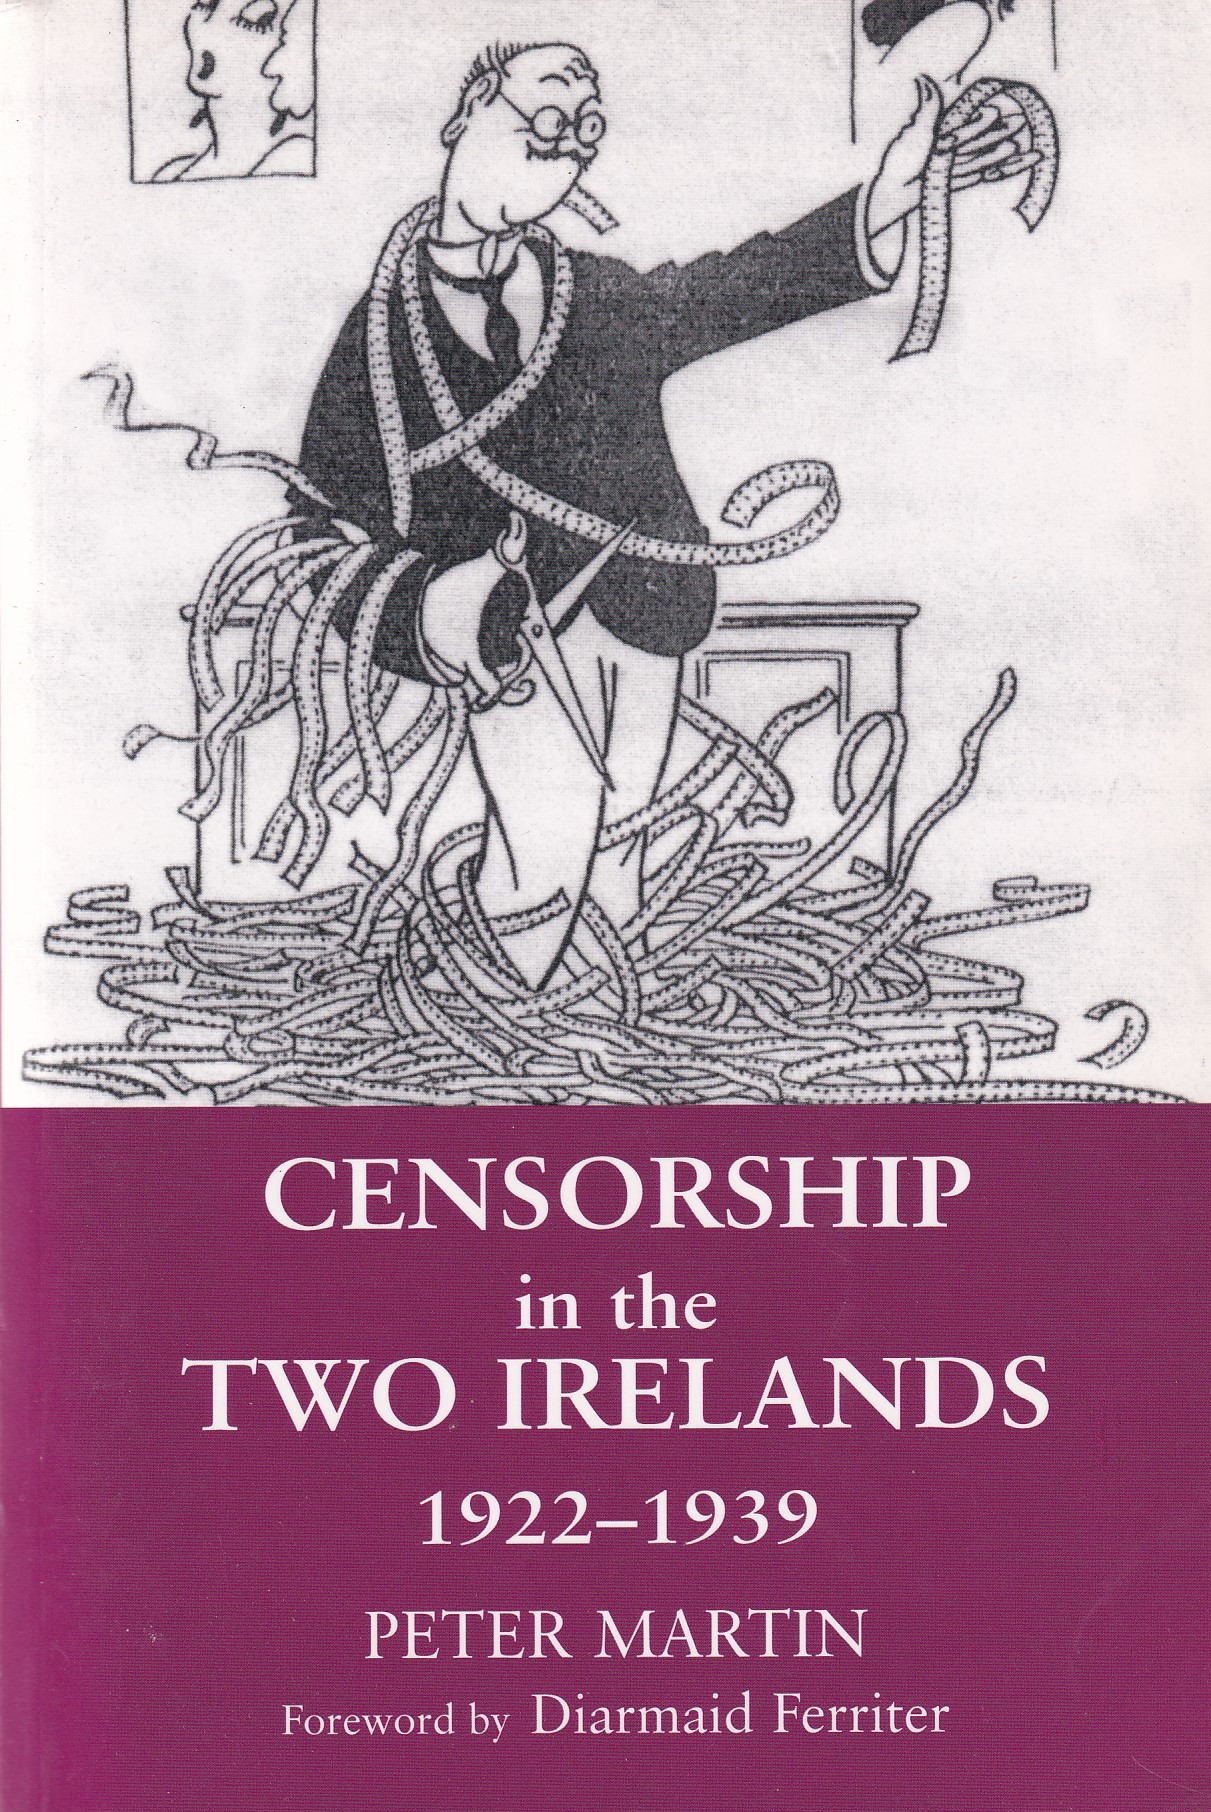 Censorship in the Two Irelands 1922-1939 | Peter Martin | Charlie Byrne's